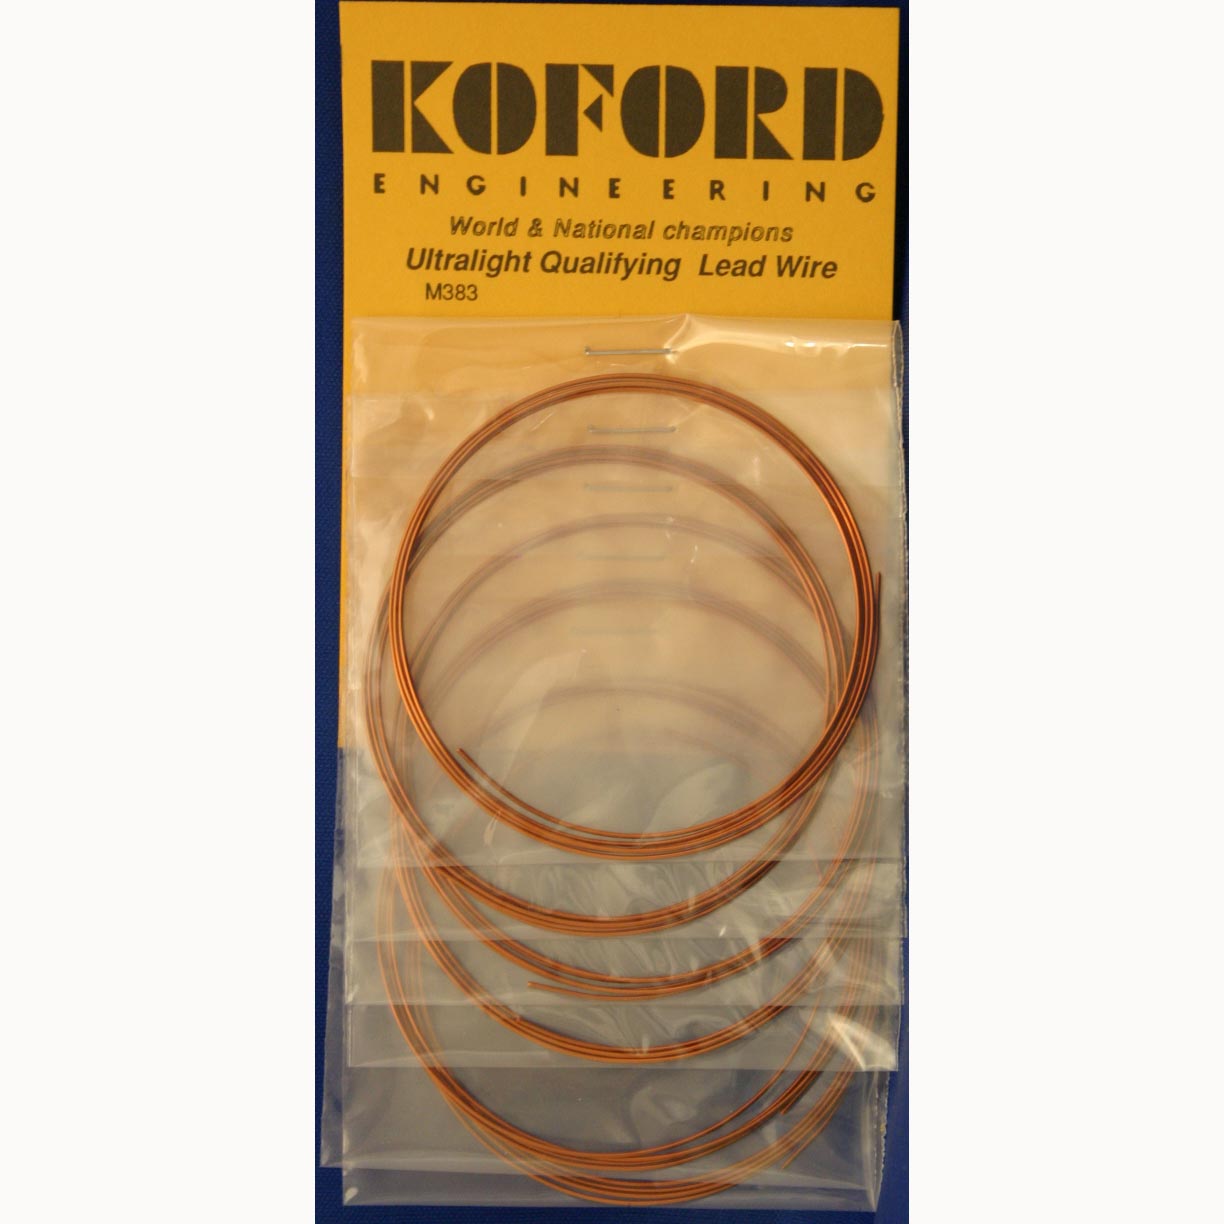 KOFORD ULTRALIGHT QUALIFYING WIRE